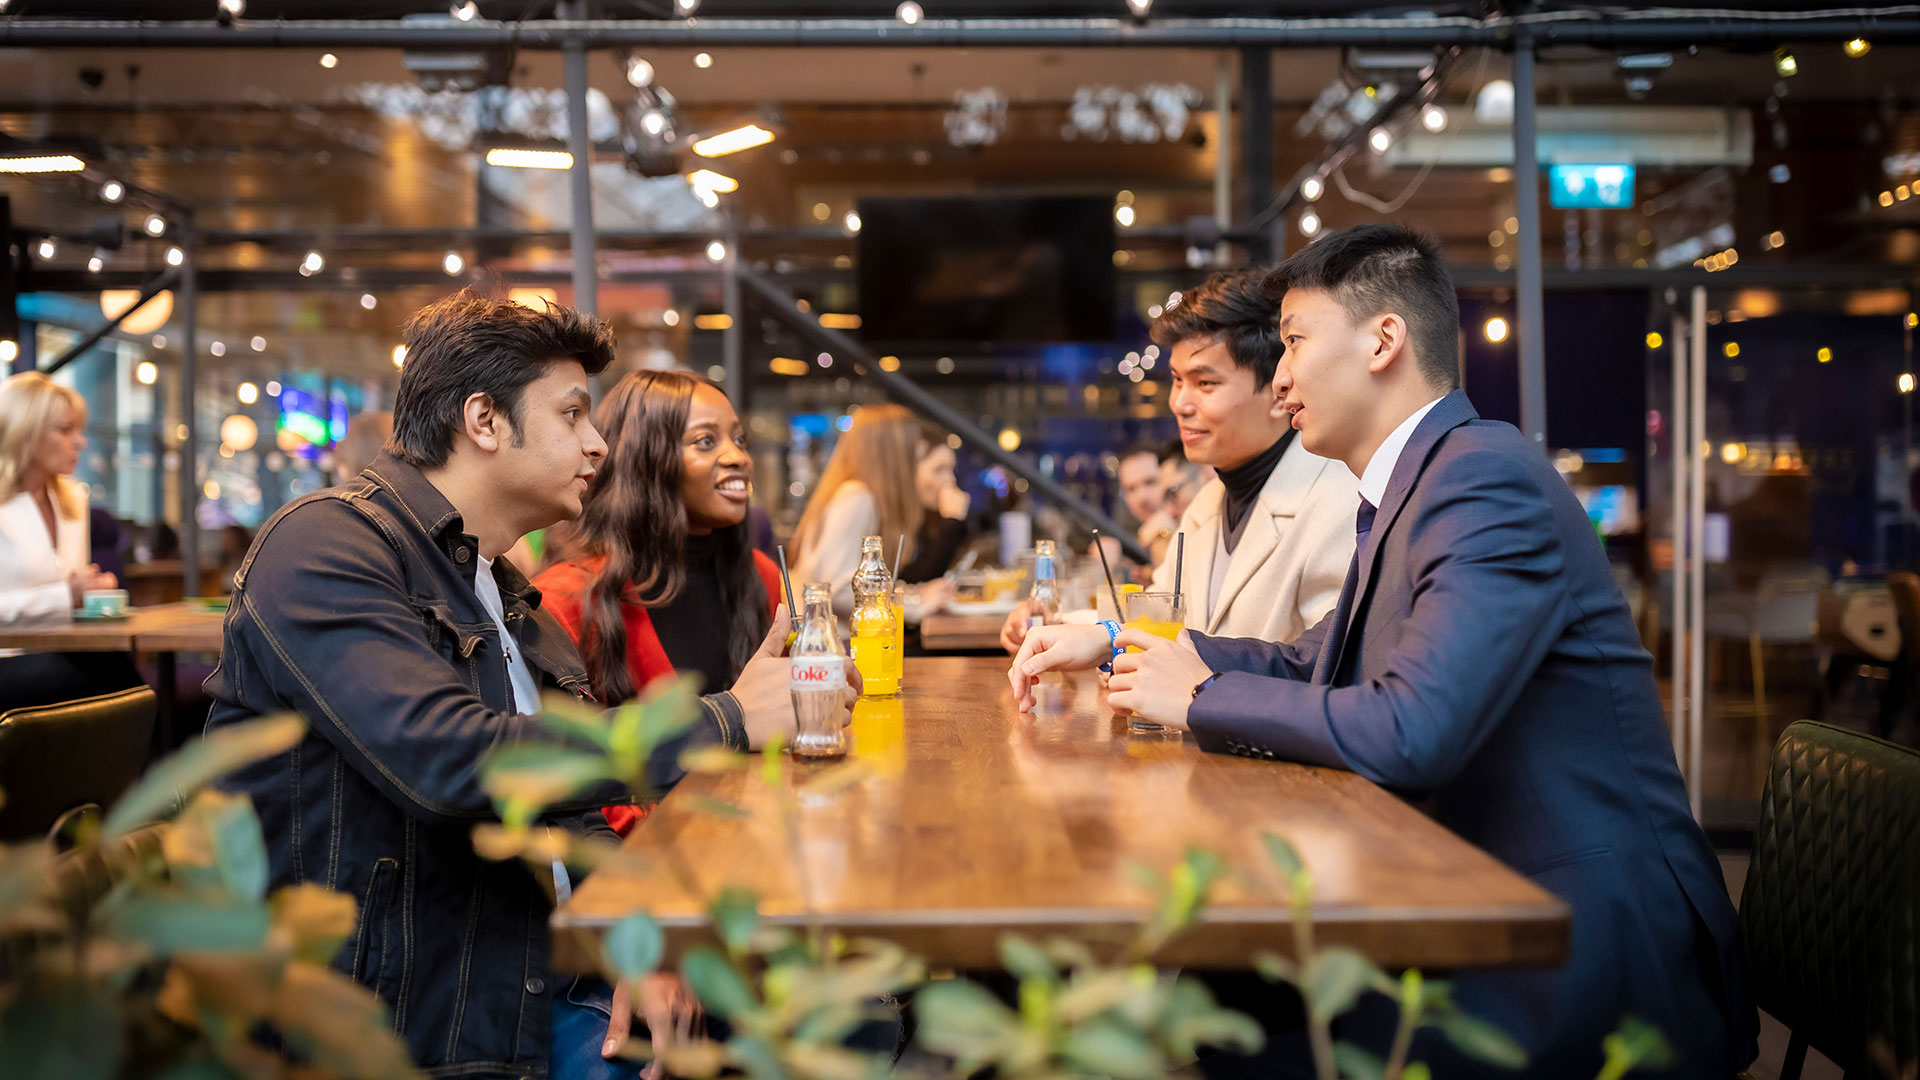 Four young people talking to each other over drinks in a busy bar